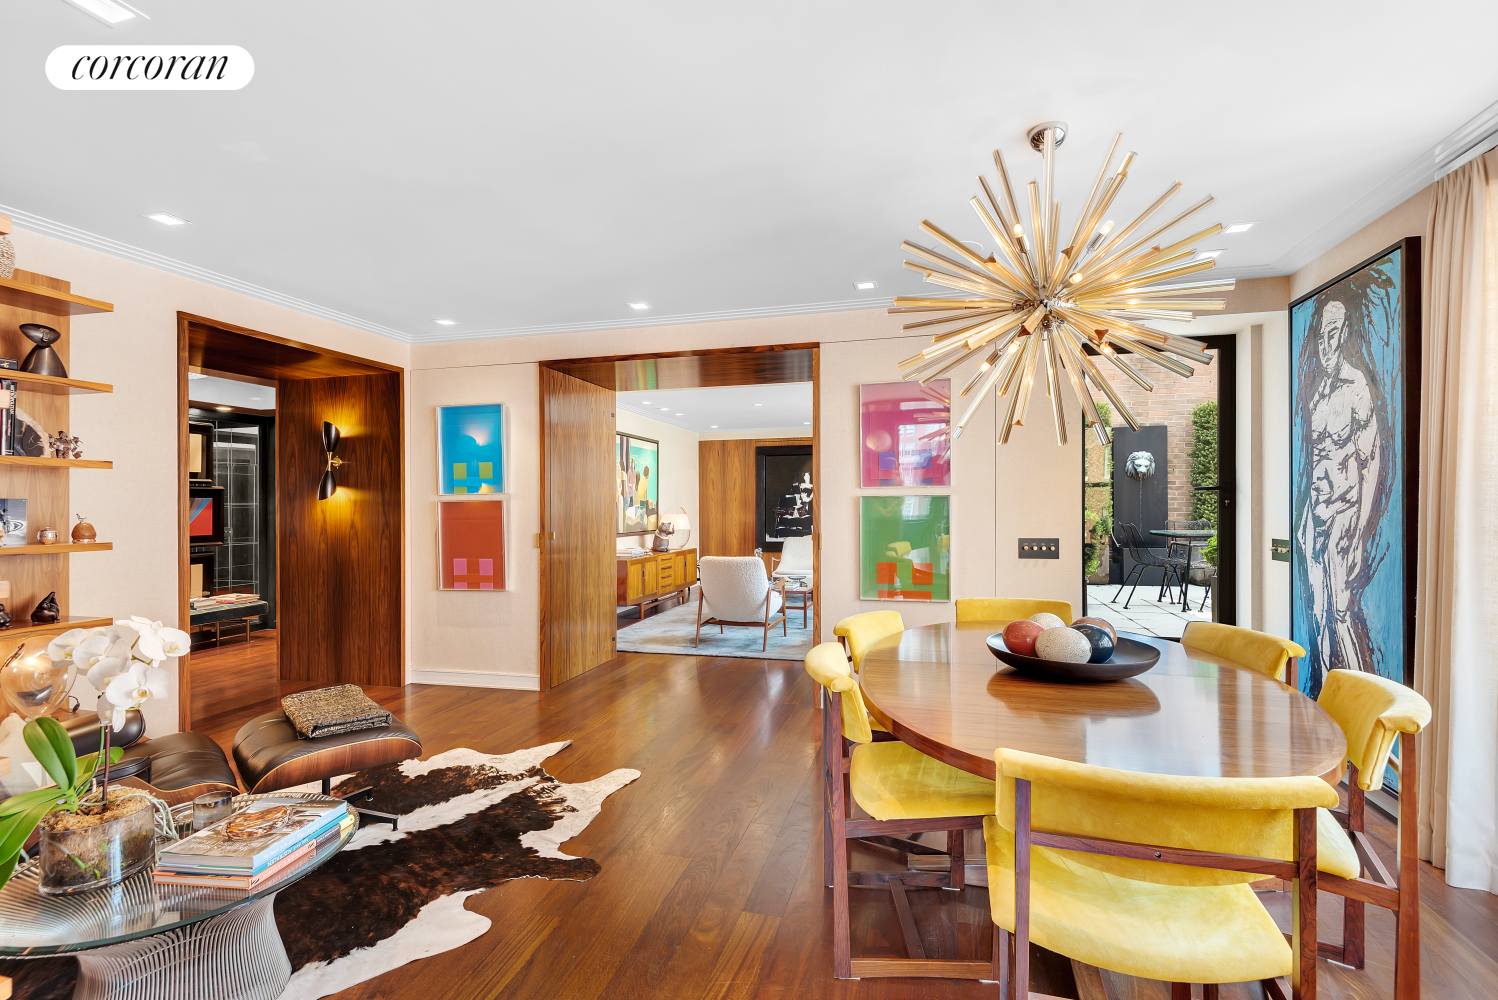 440 East 56th Street 12F, Sutton, Midtown East, NYC - 2 Bedrooms  
2 Bathrooms  
5 Rooms - 